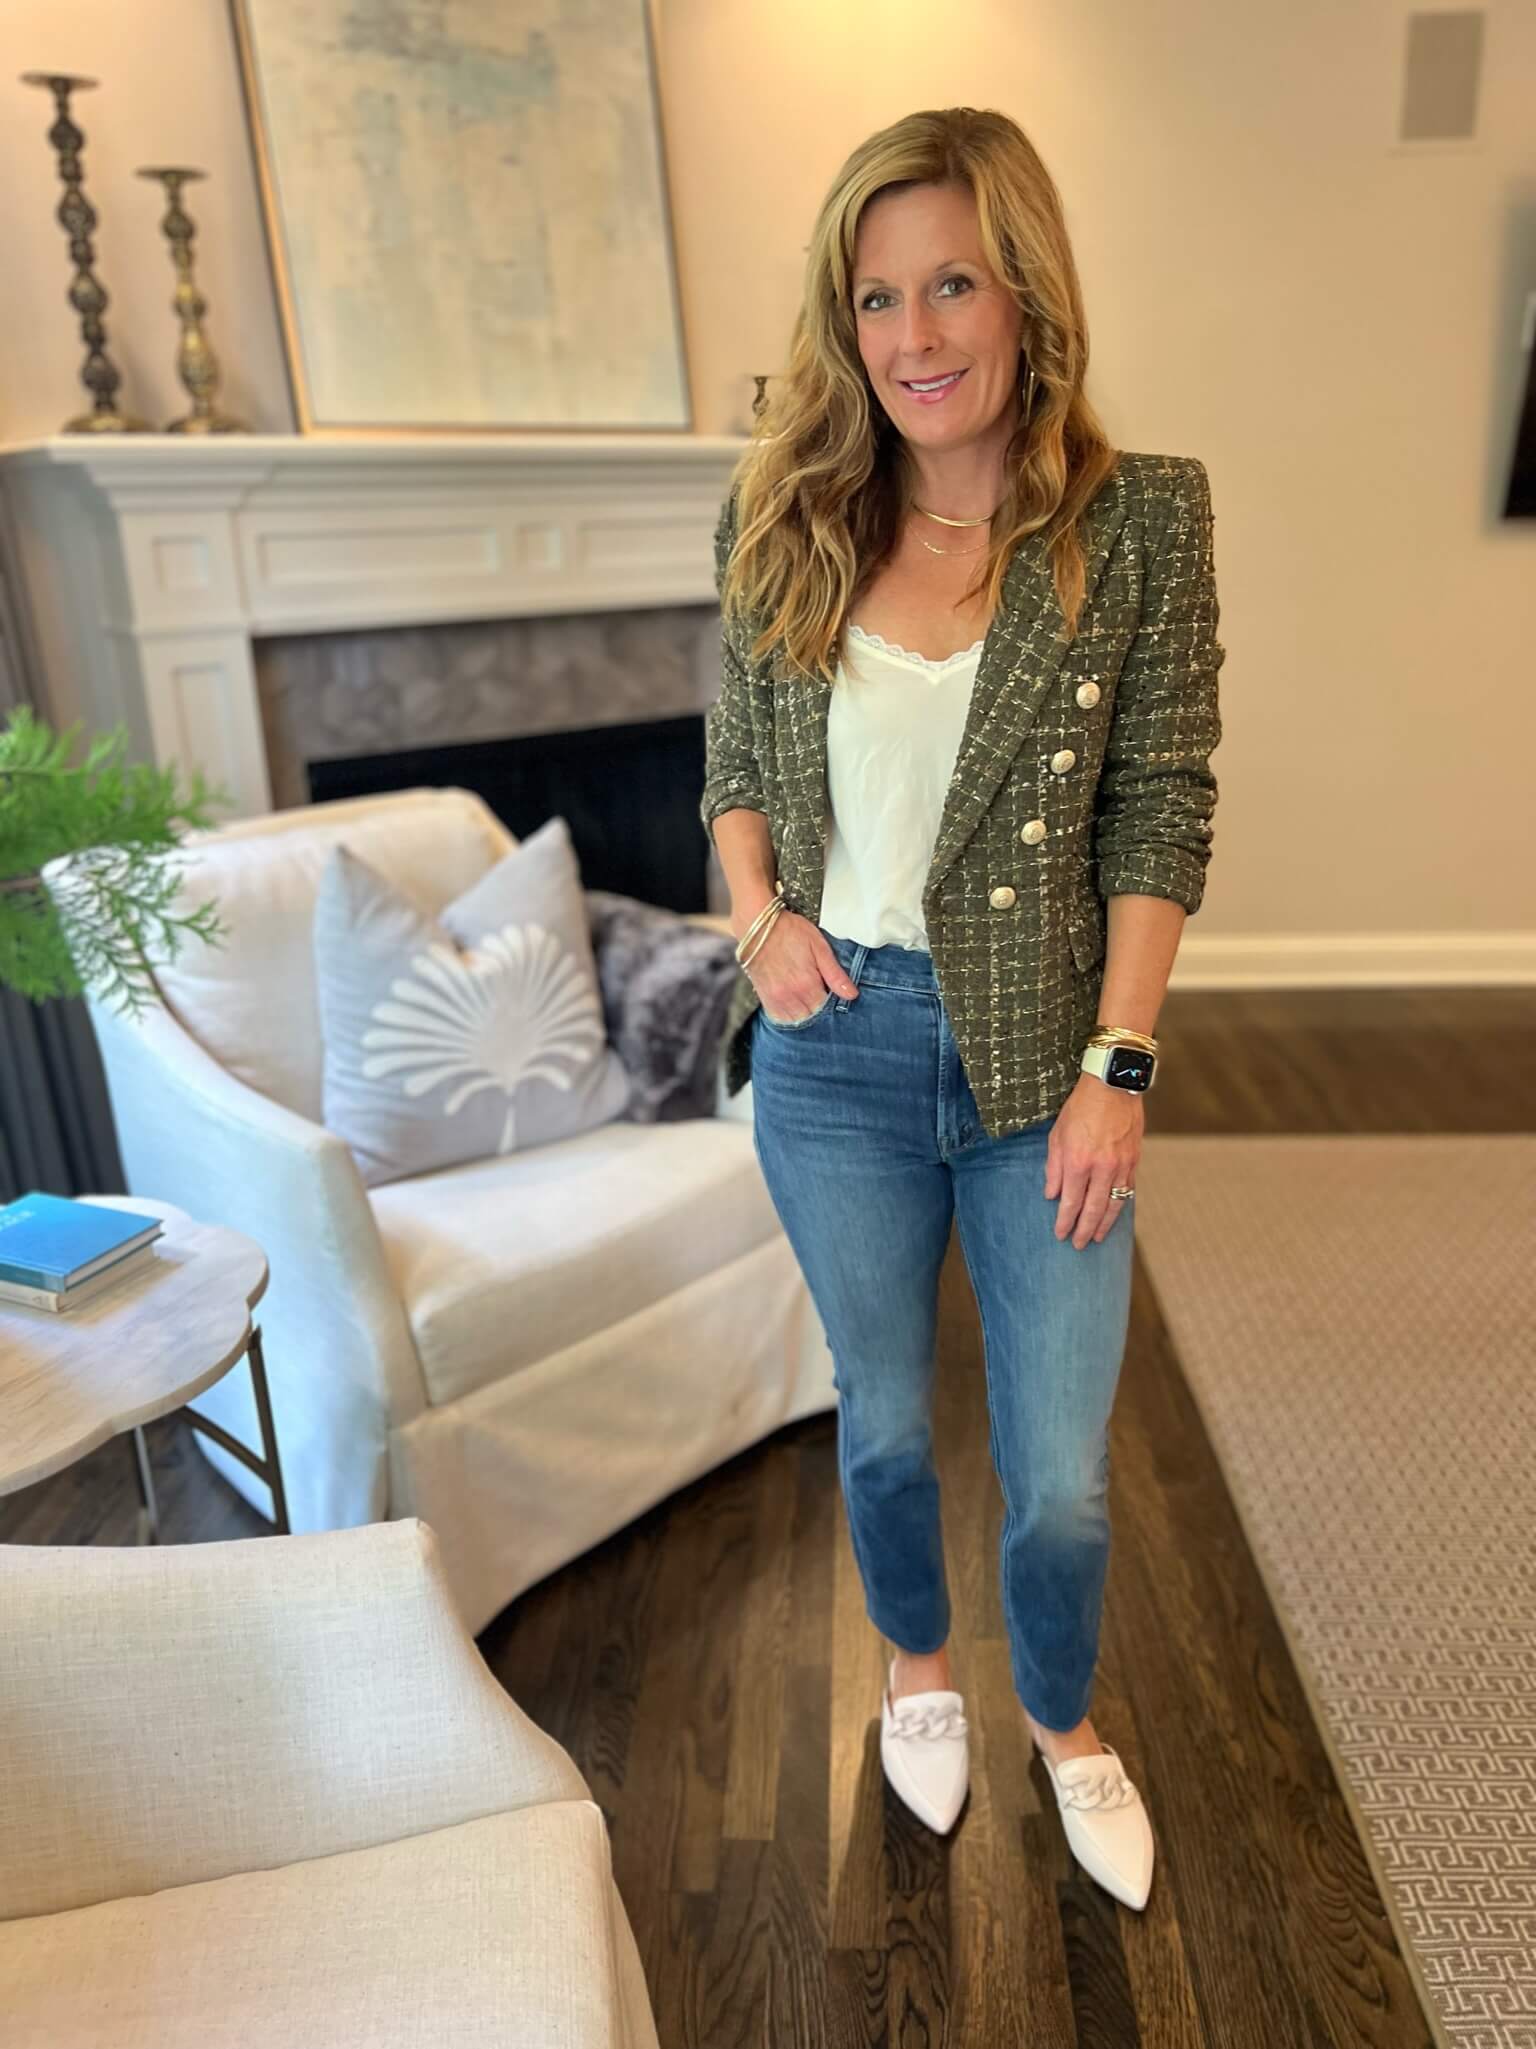 tweed double breasted blazer and jeans how to wear a dressy blazer with jeans Nashville personal stylists share how to wear a blazer with jeans how to wear a blazer with flats